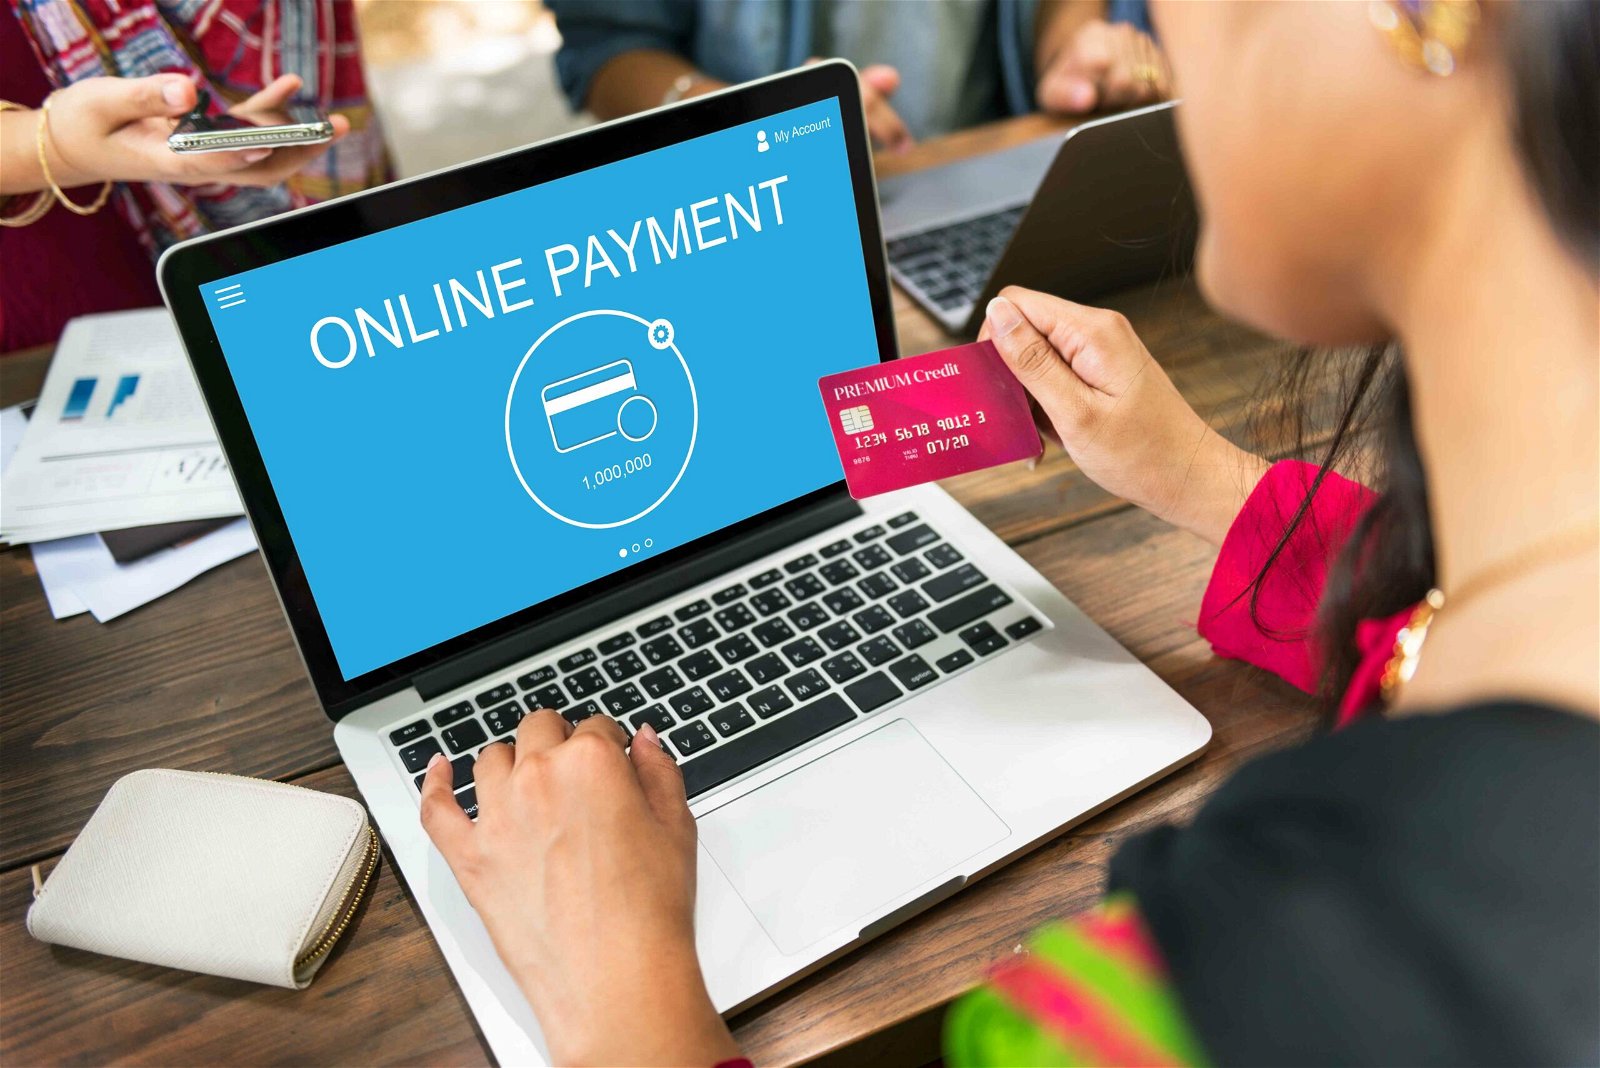 Online Payment-Small Business's Cash Flow